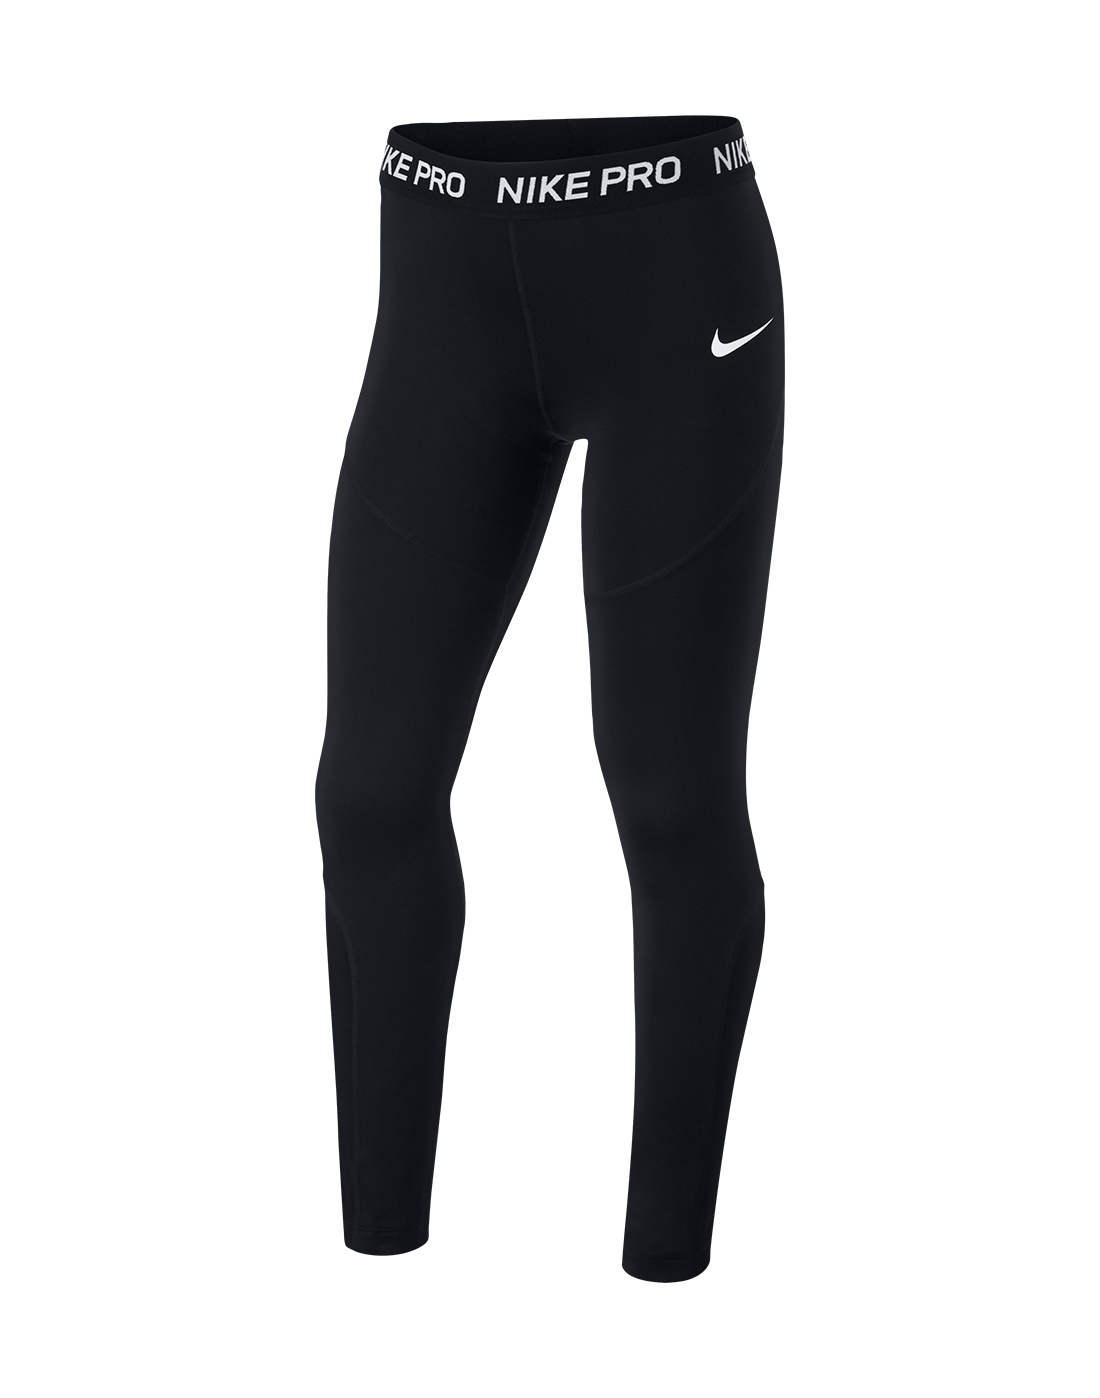 Girl's Black Nike Pro Tights | Life Style Sports